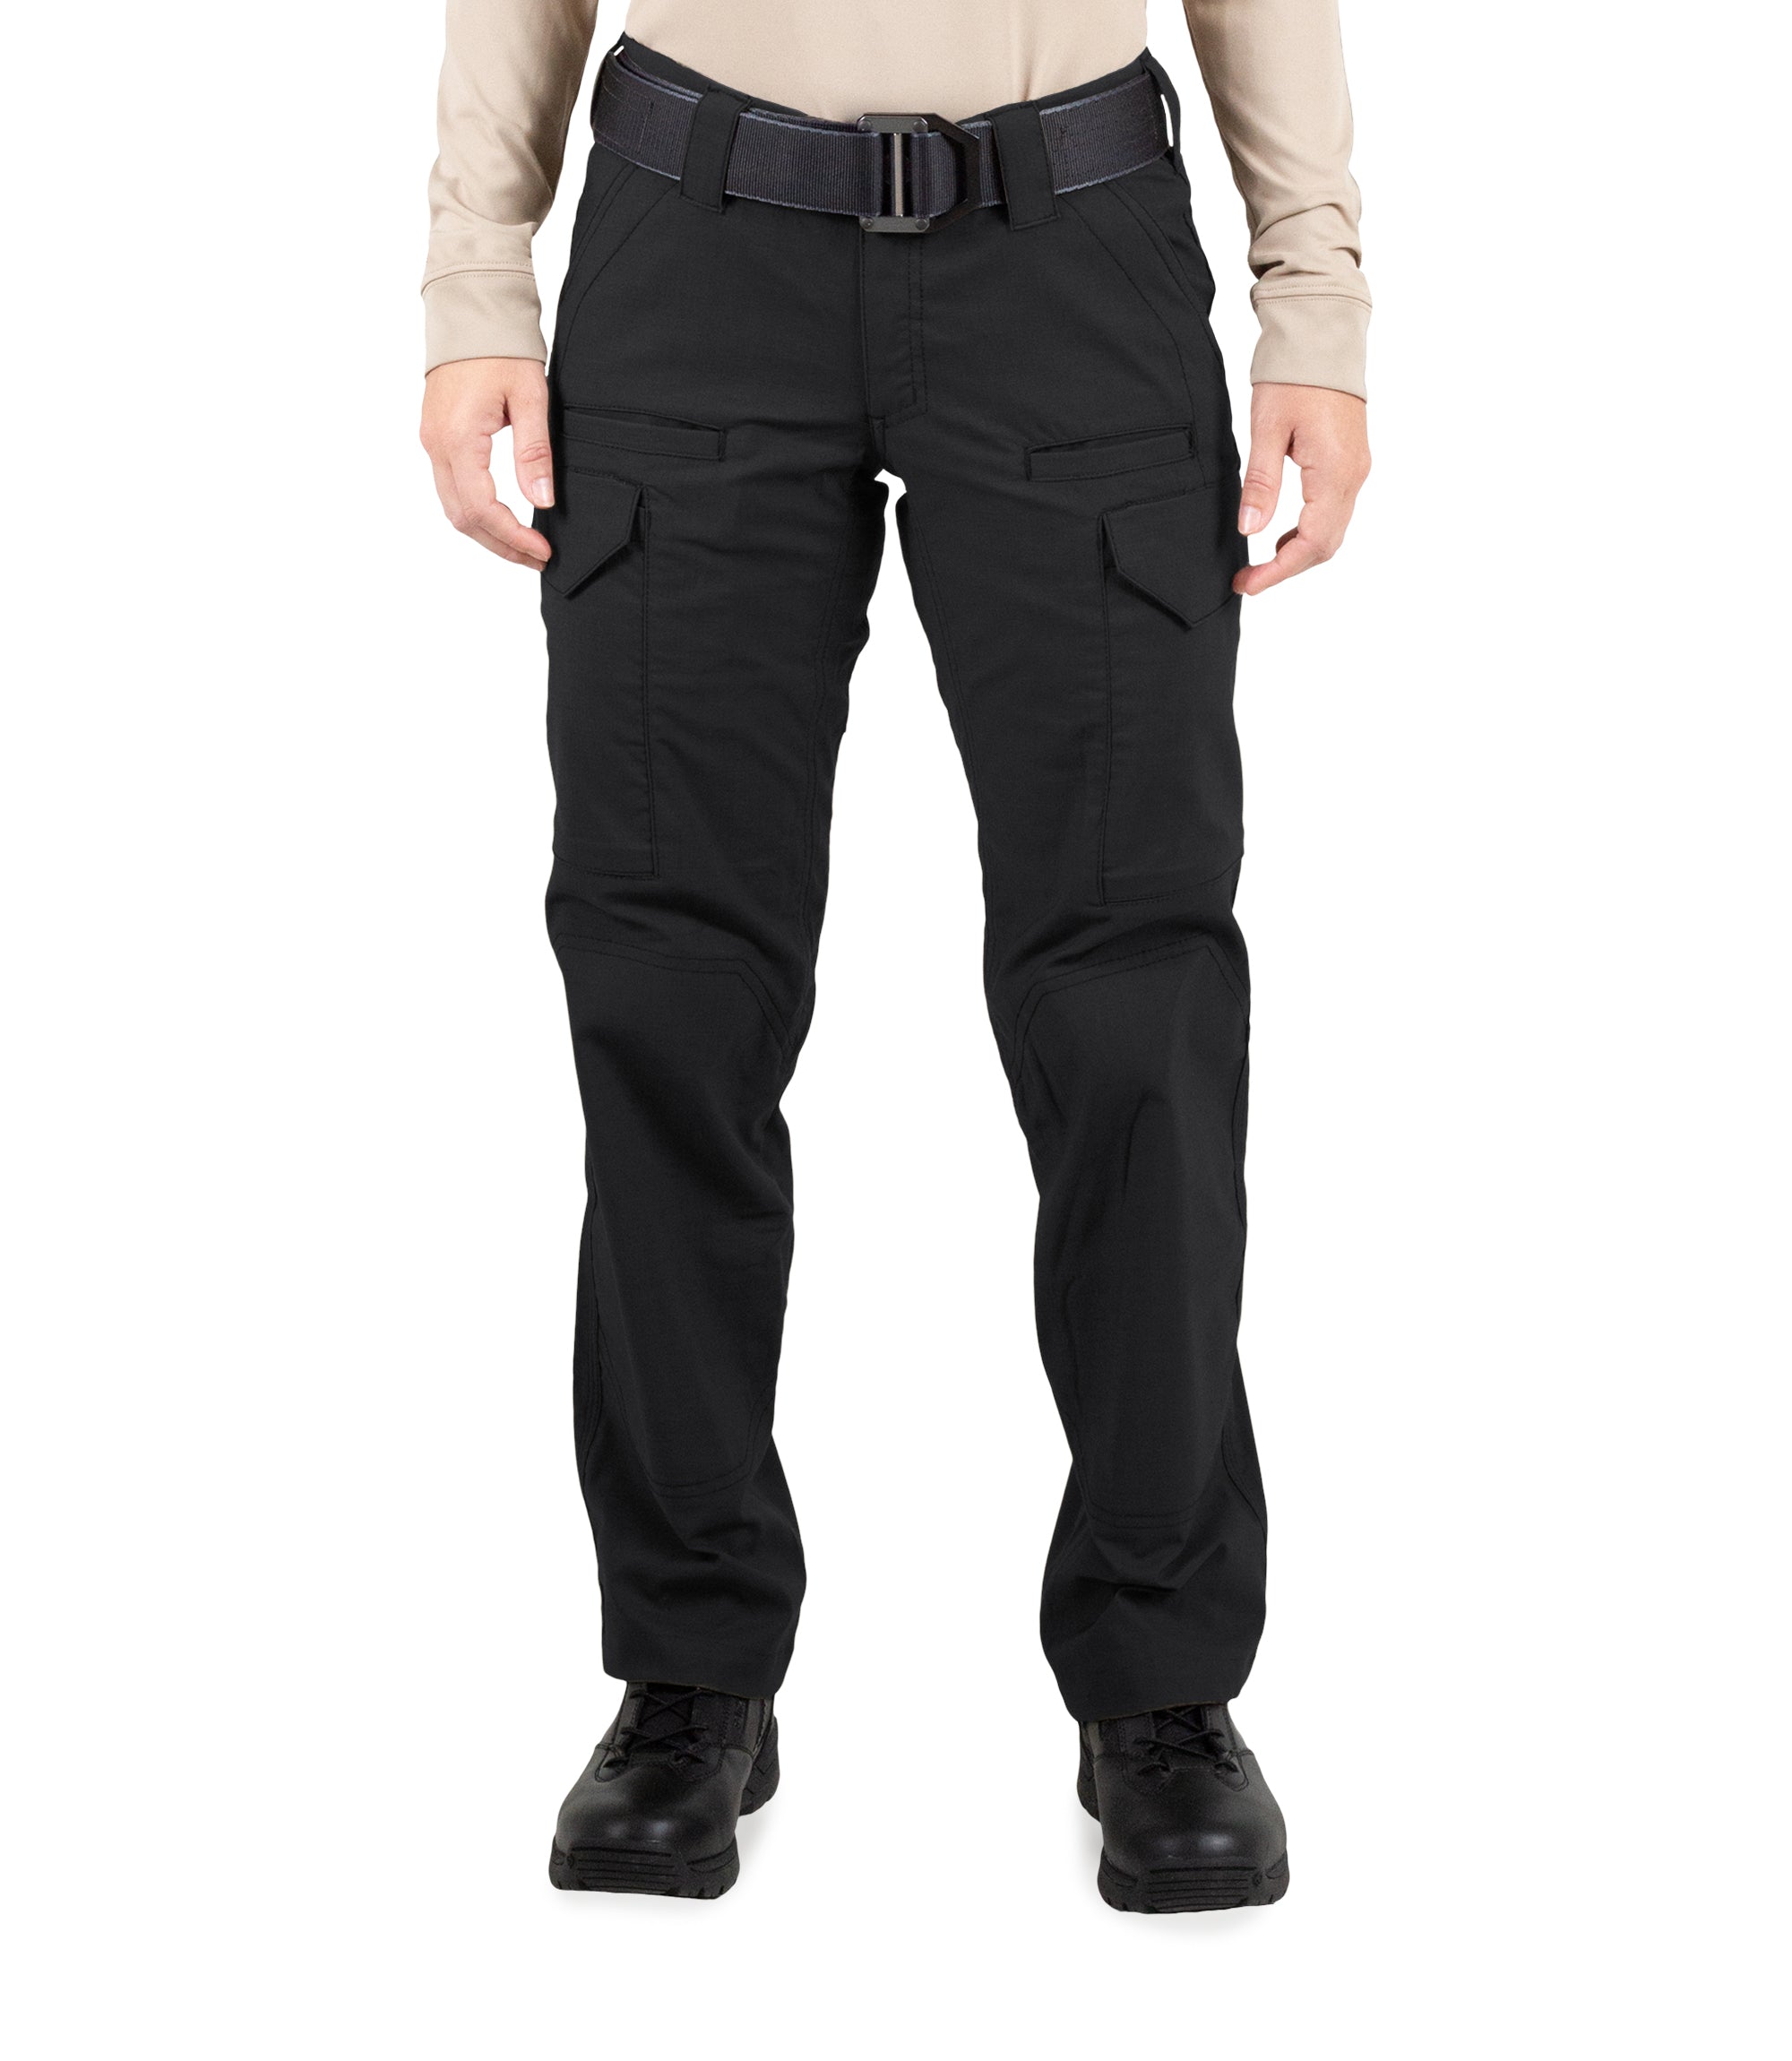 puls skinke Mission Women's V2 Tactical Pants – First Tactical